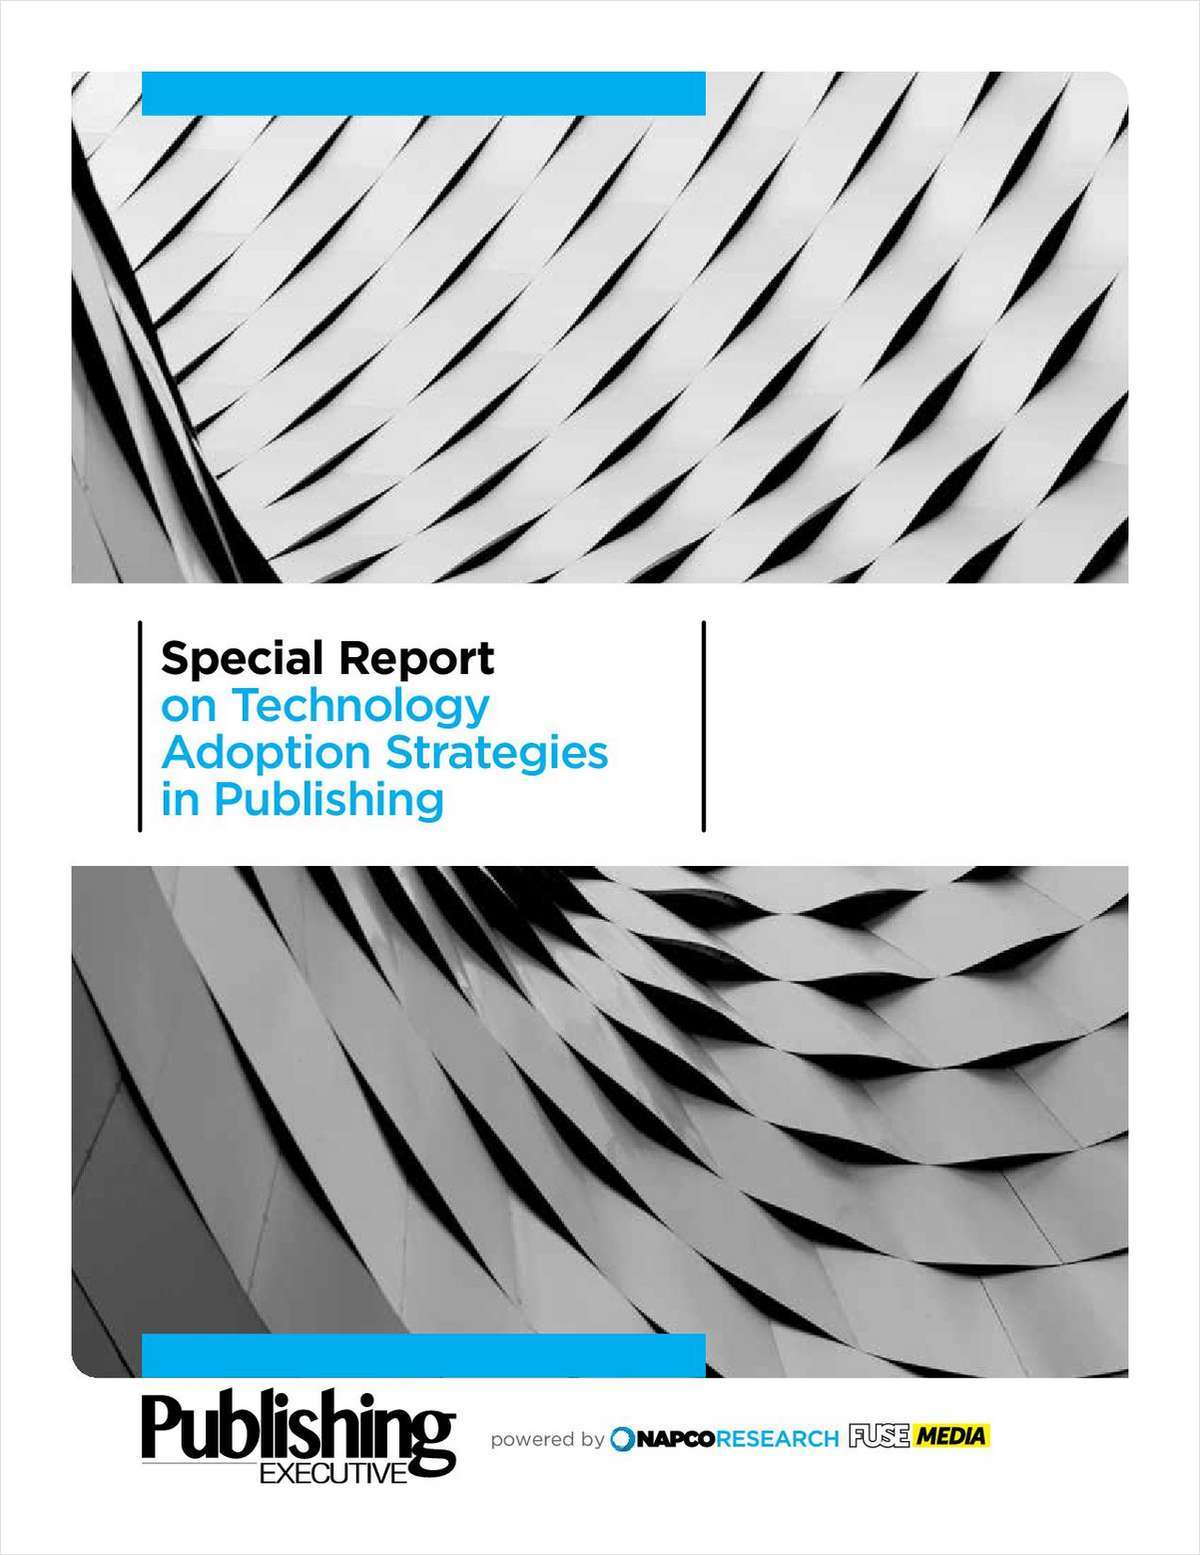 Special Report on Technology Adoption Strategies in Publishing